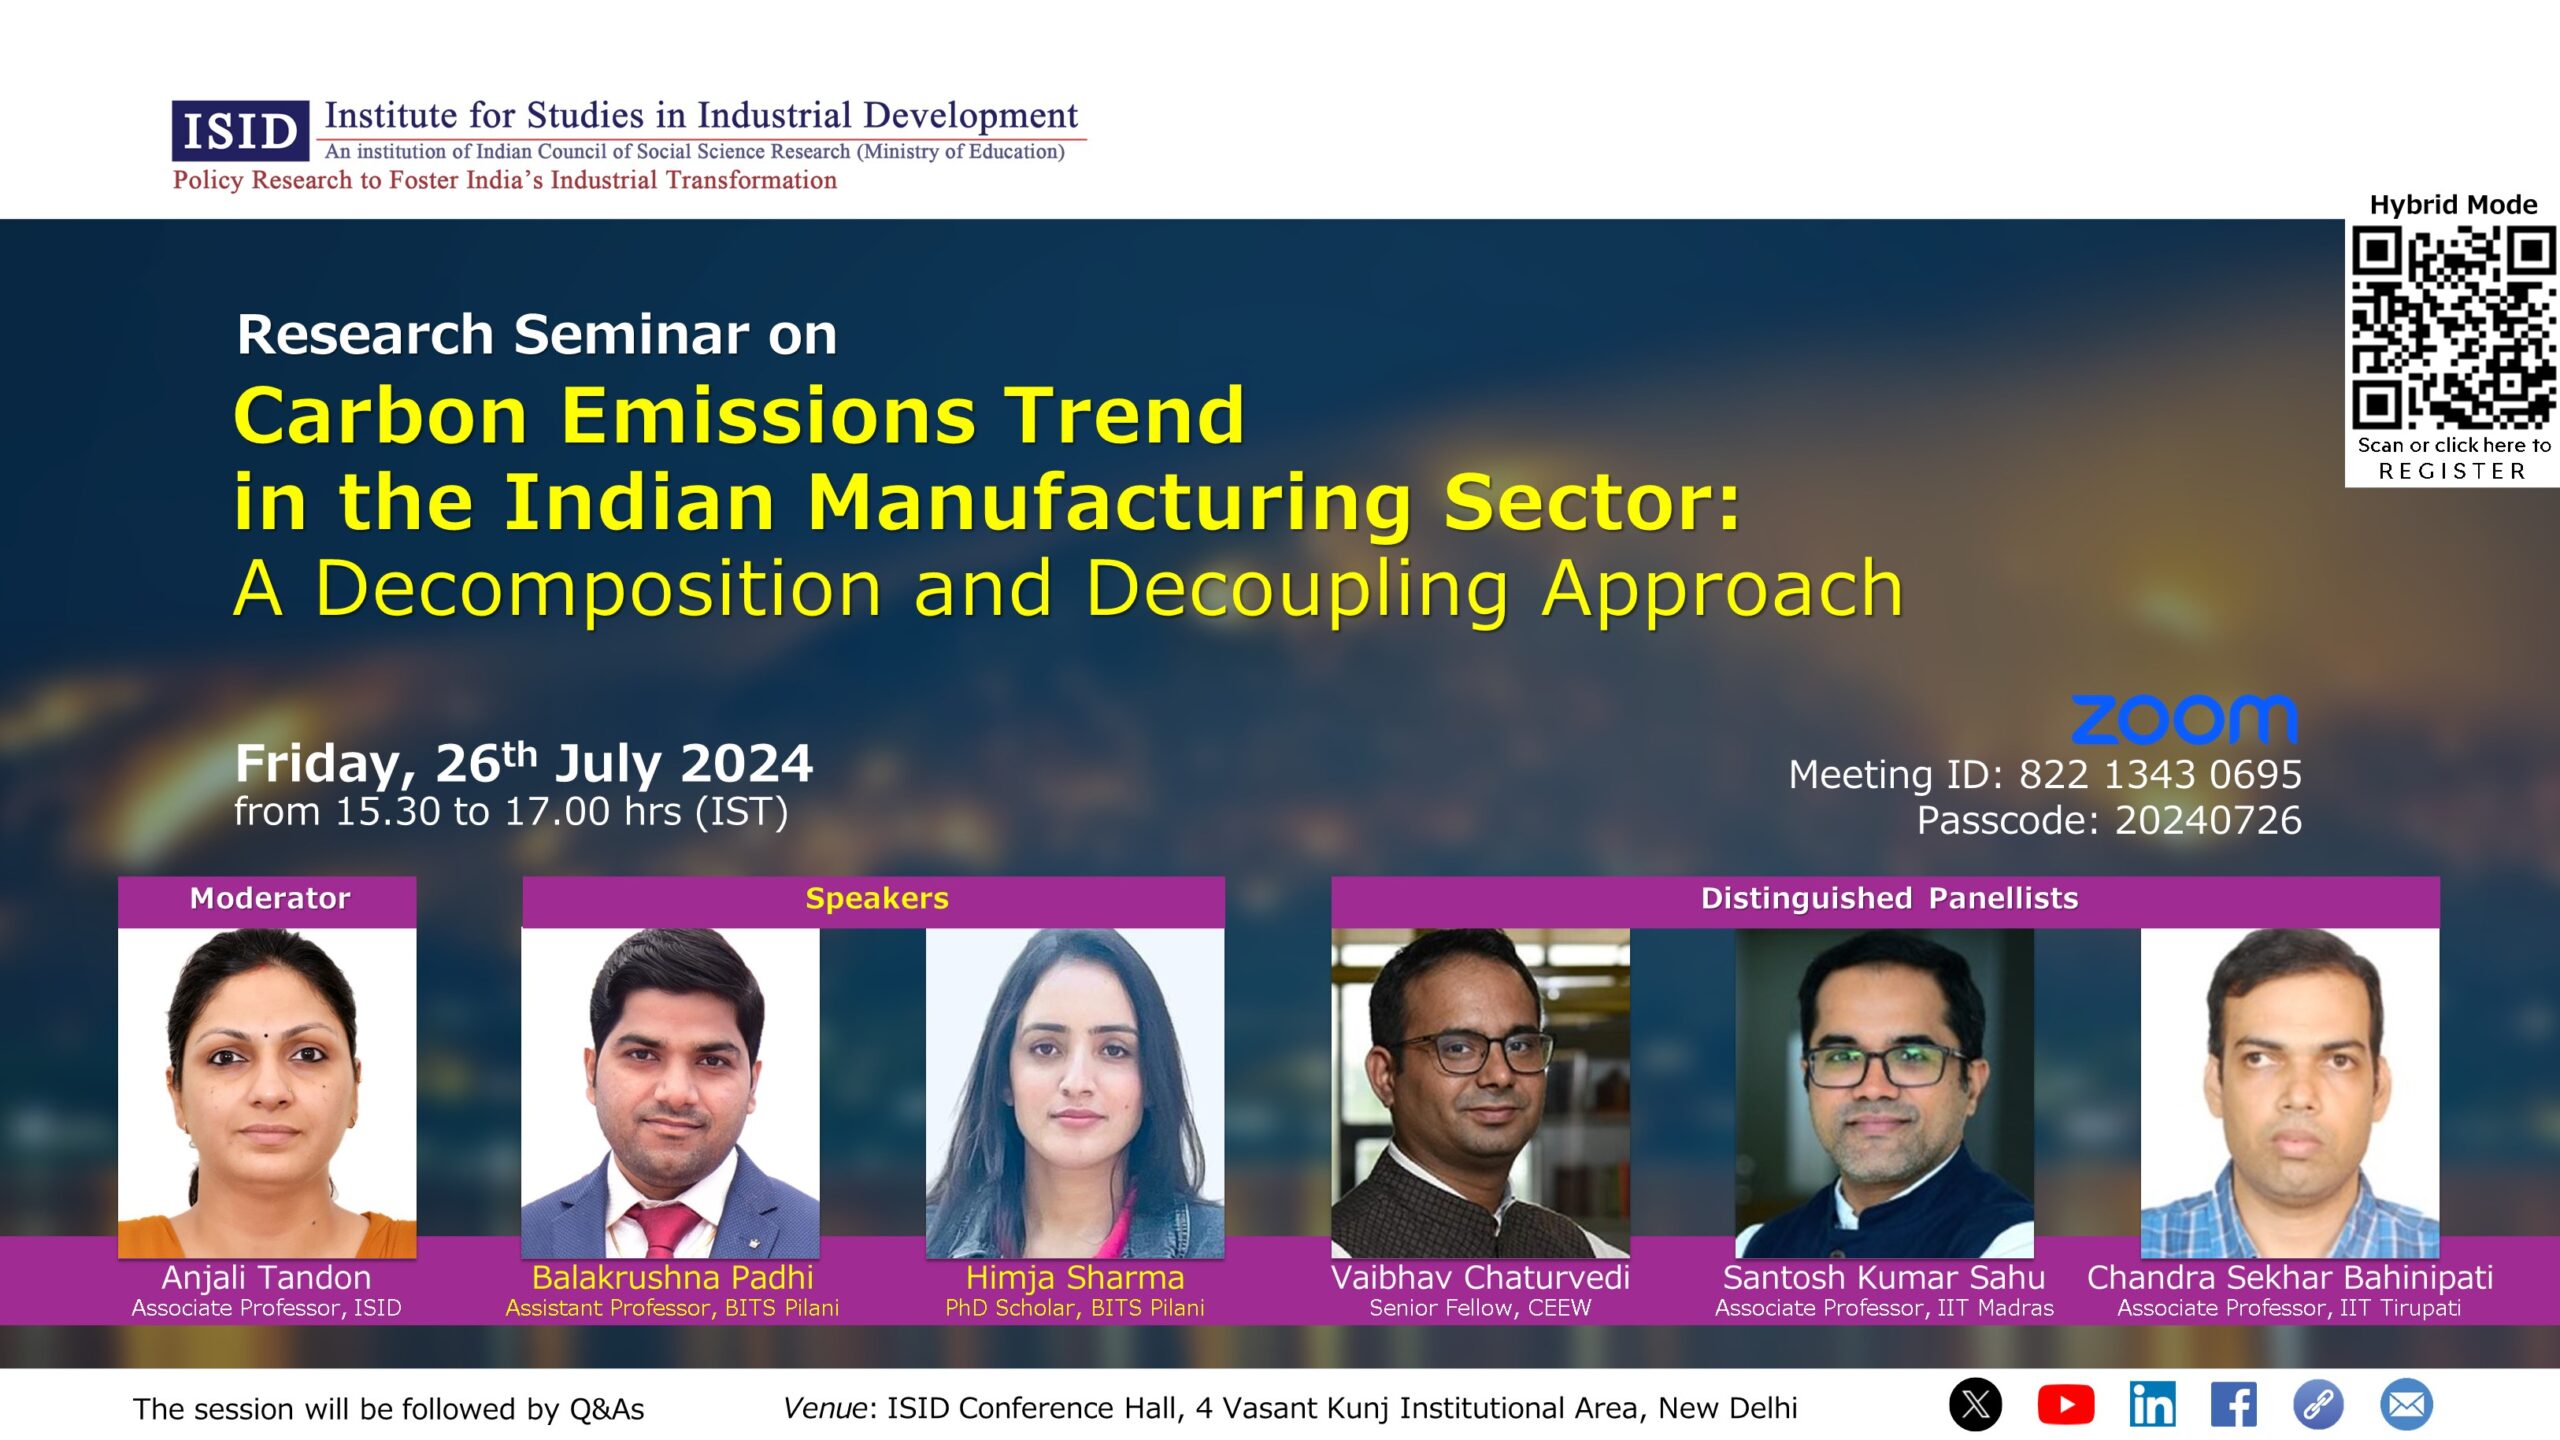 Research Seminar on Carbon Emissions Trend in the Indian Manufacturing Sector: A Decomposition and Decoupling Approach